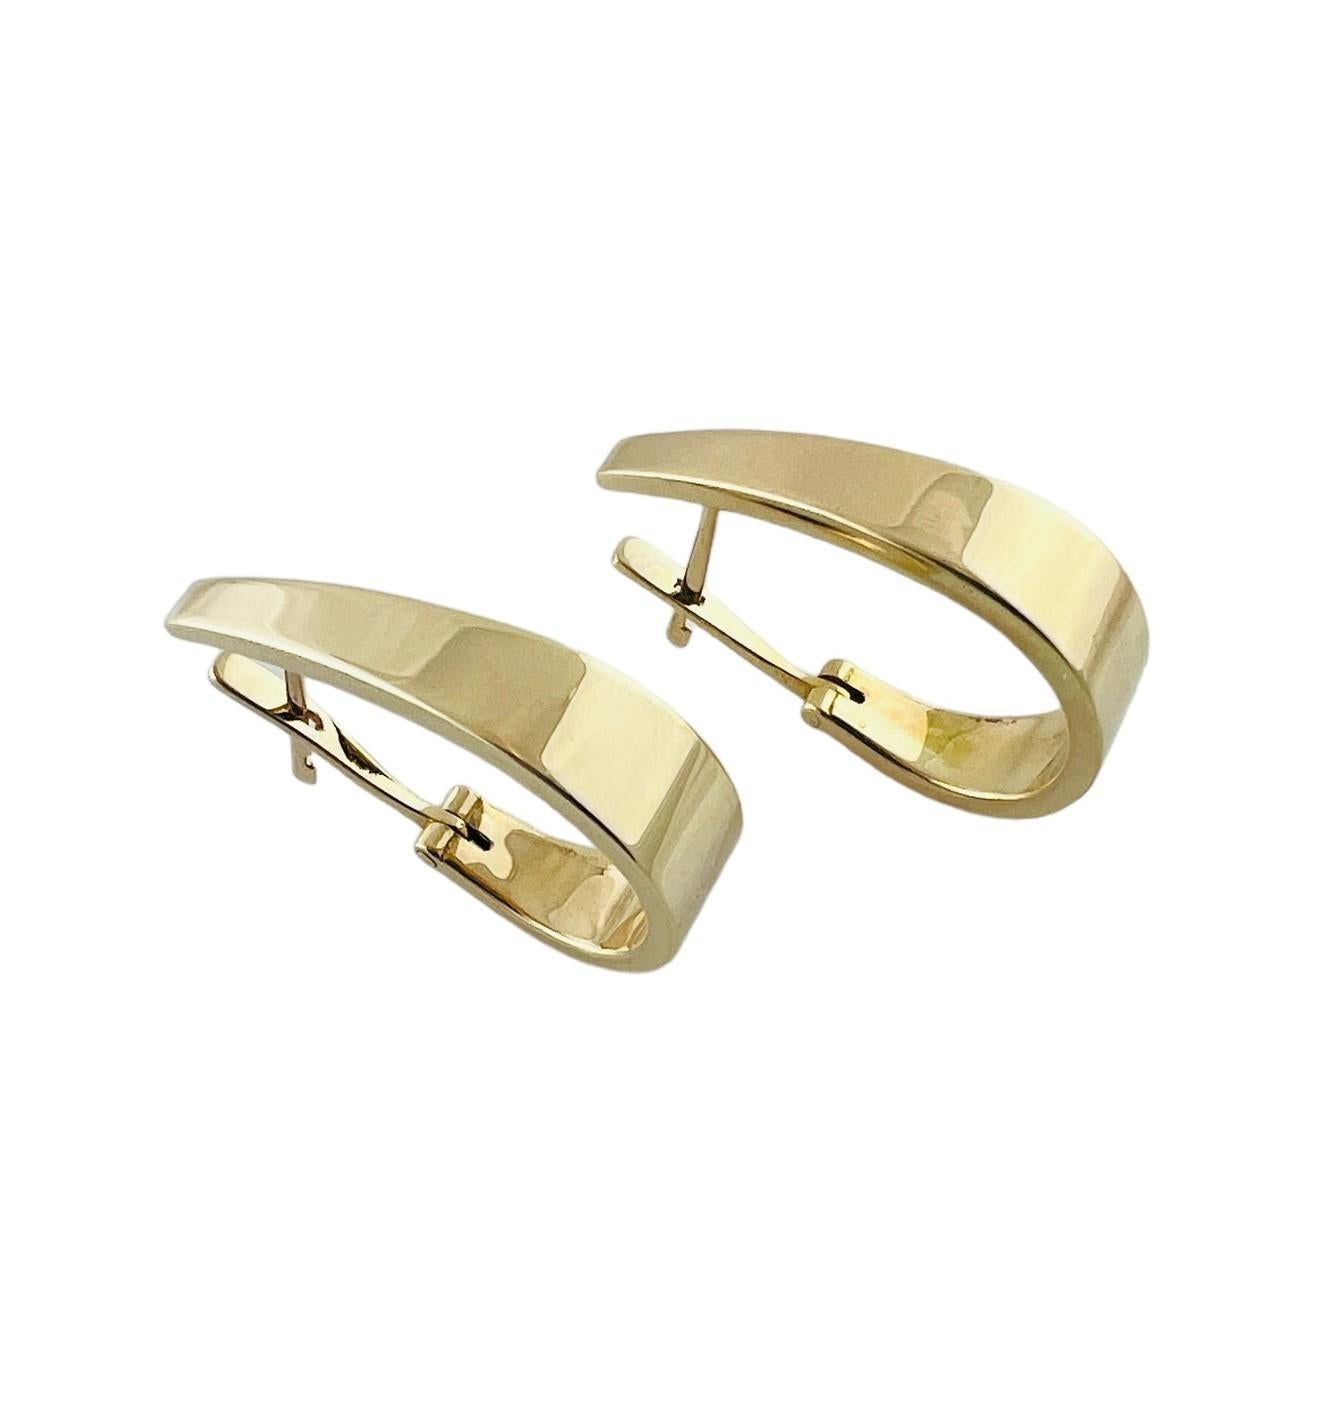 14K Yellow Gold J Hoop Earrings -

These stunning earrings are a classy accessory.

Size:  24.4 mm X 16.36 mm X 1.73 mm

Weight:  1.75 dwt. /  2.7 gr.

Marked:  14K CJI O 

Very good condition, professionally polished.

Will come packaged in a gift